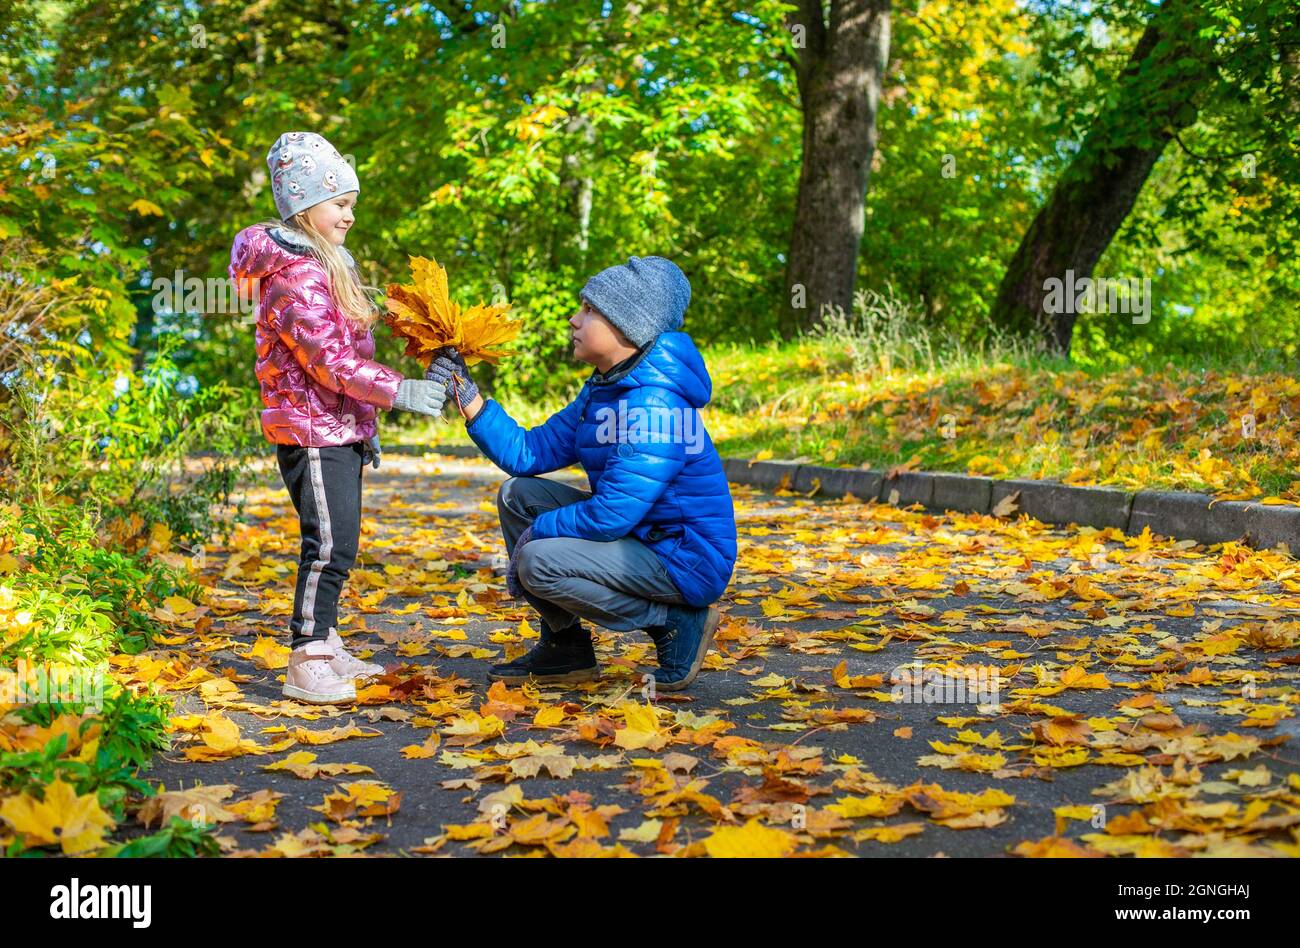 A boy squatting down gives a bouquet of yellow maple leaves a girl Stock Photo